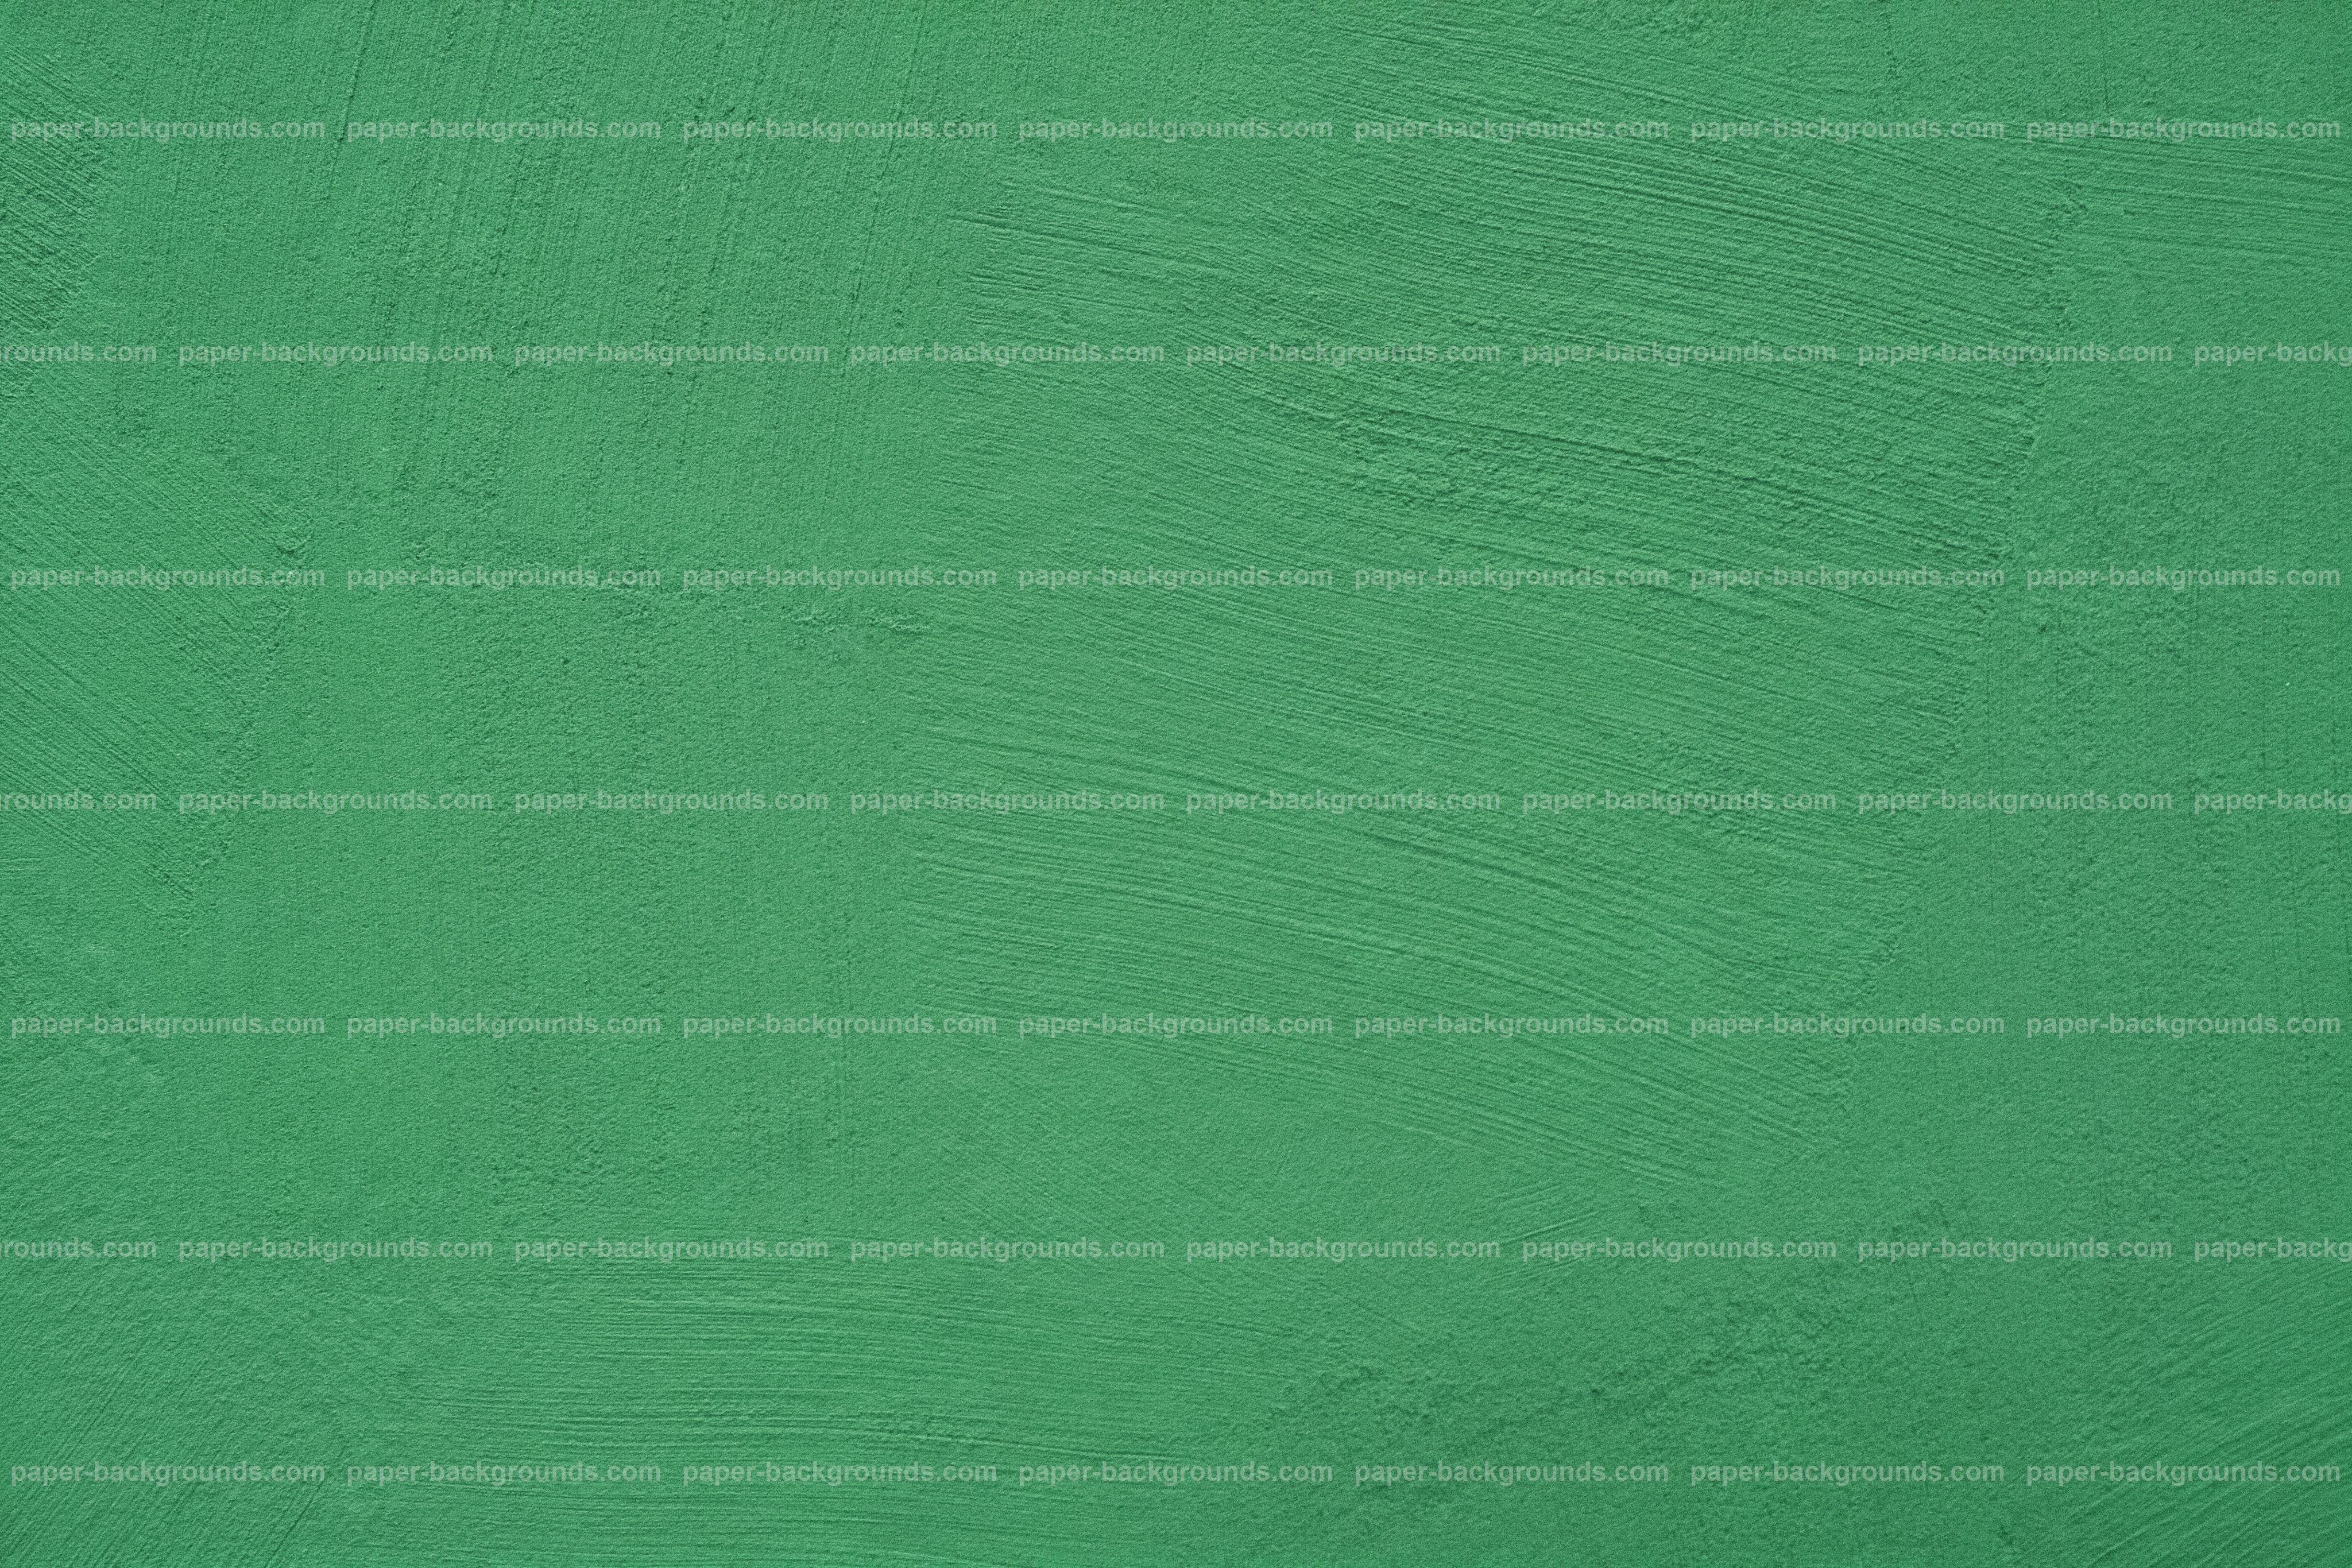 Paper Backgrounds | Green Painted Concrete Wall Texture High Resolution